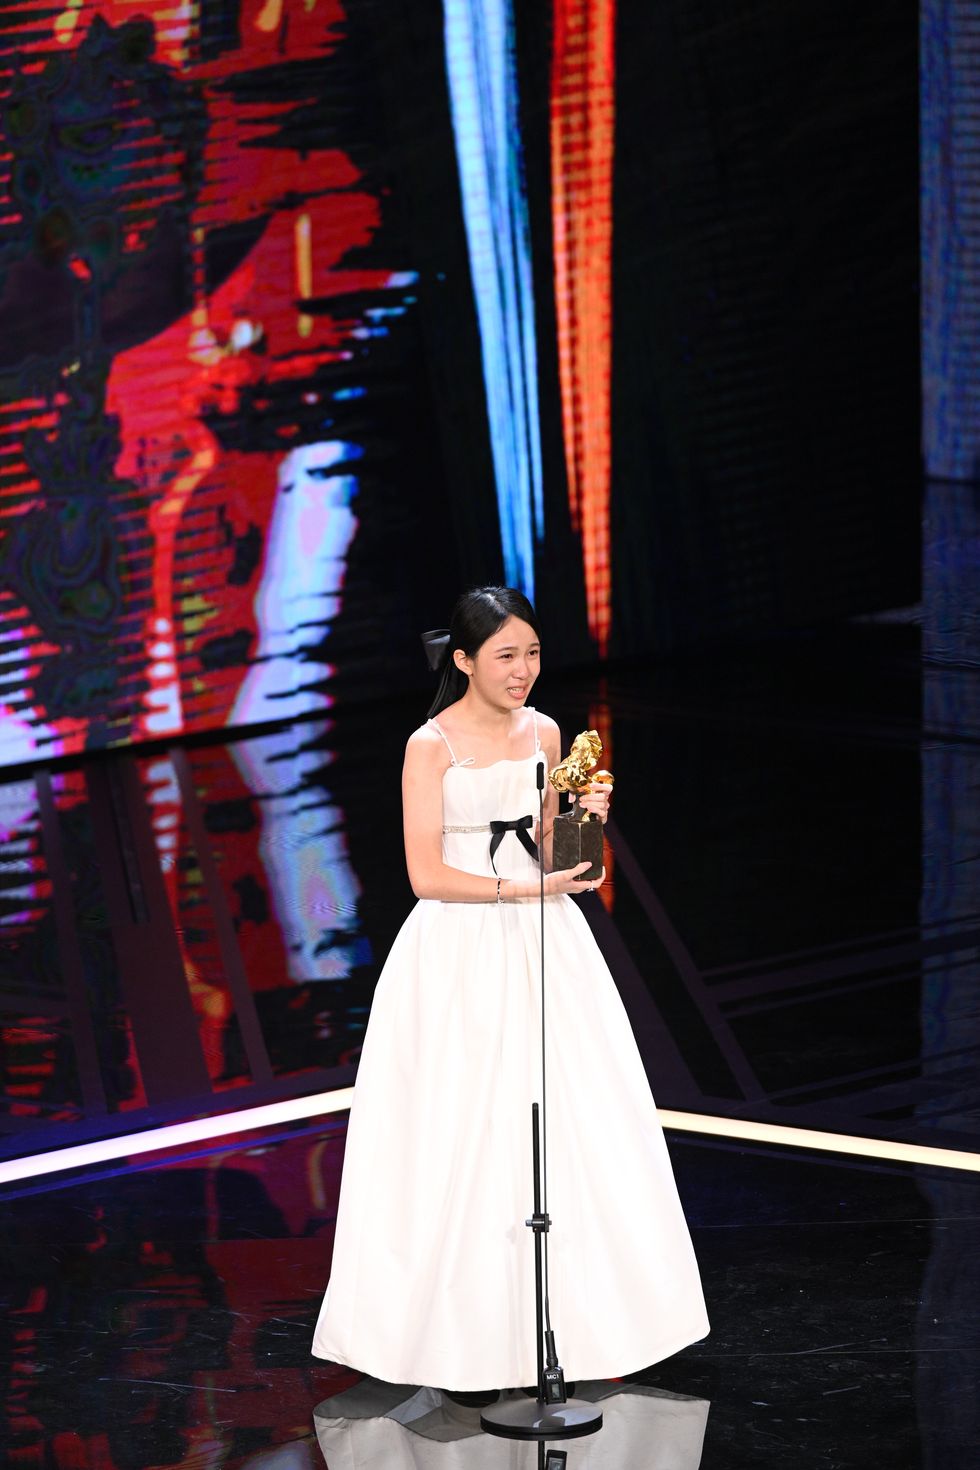 a person in a white dress holding a trophy